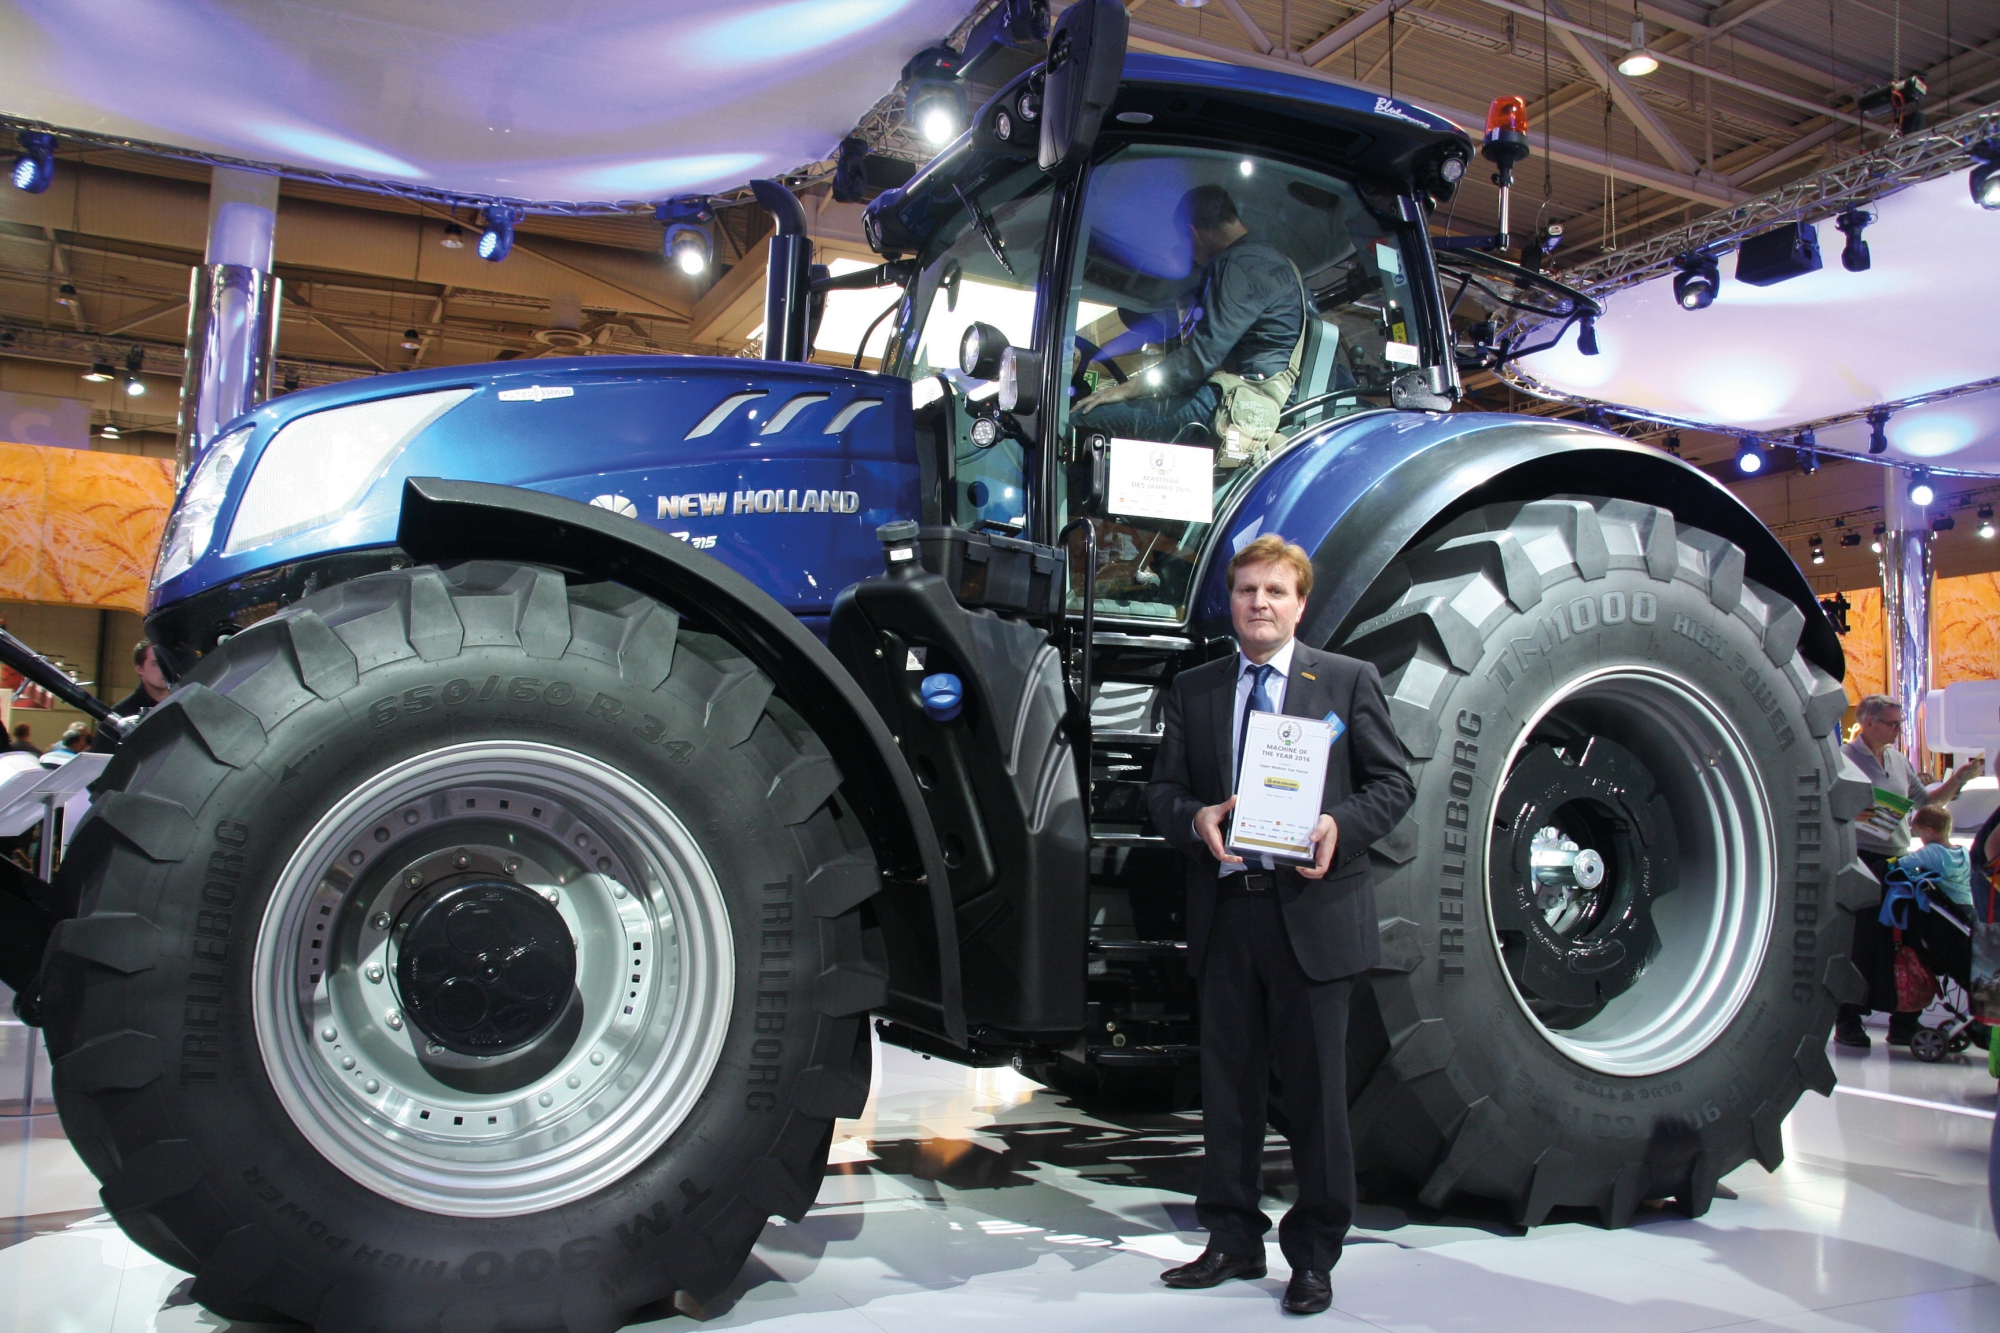 NEW HOLLAND T7.315 TRACTOR WINS MACHINE OF THE YEAR 2016 TITLE IN THE L CATEGORY AT AGRITECHNICA SHOW